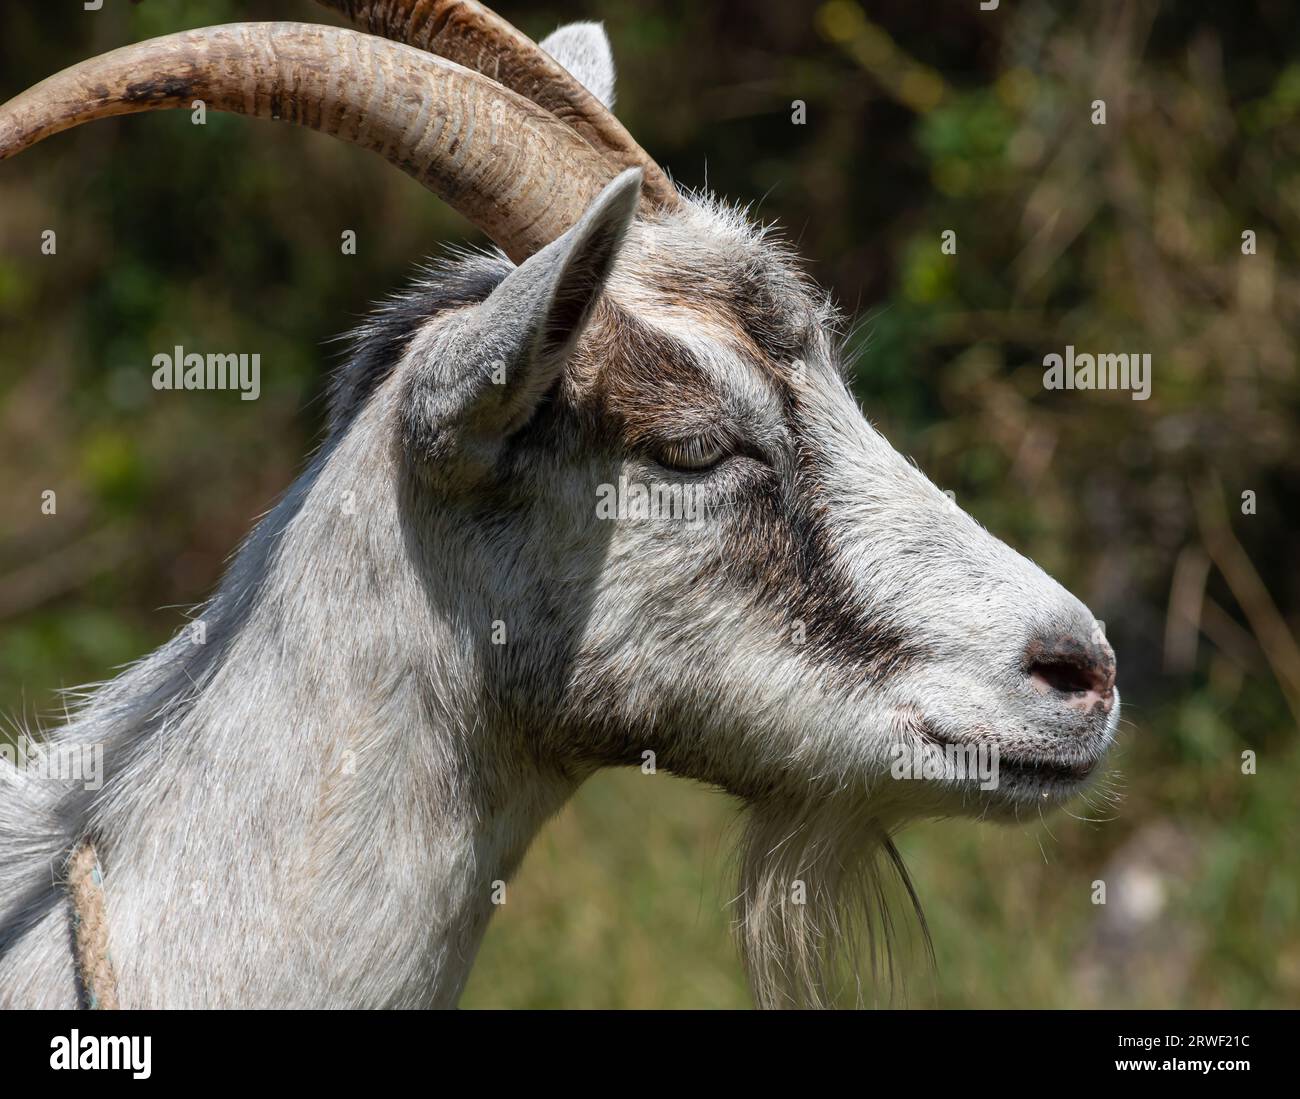 Grey goat at the pasture at the sunny summer day Stock Photo